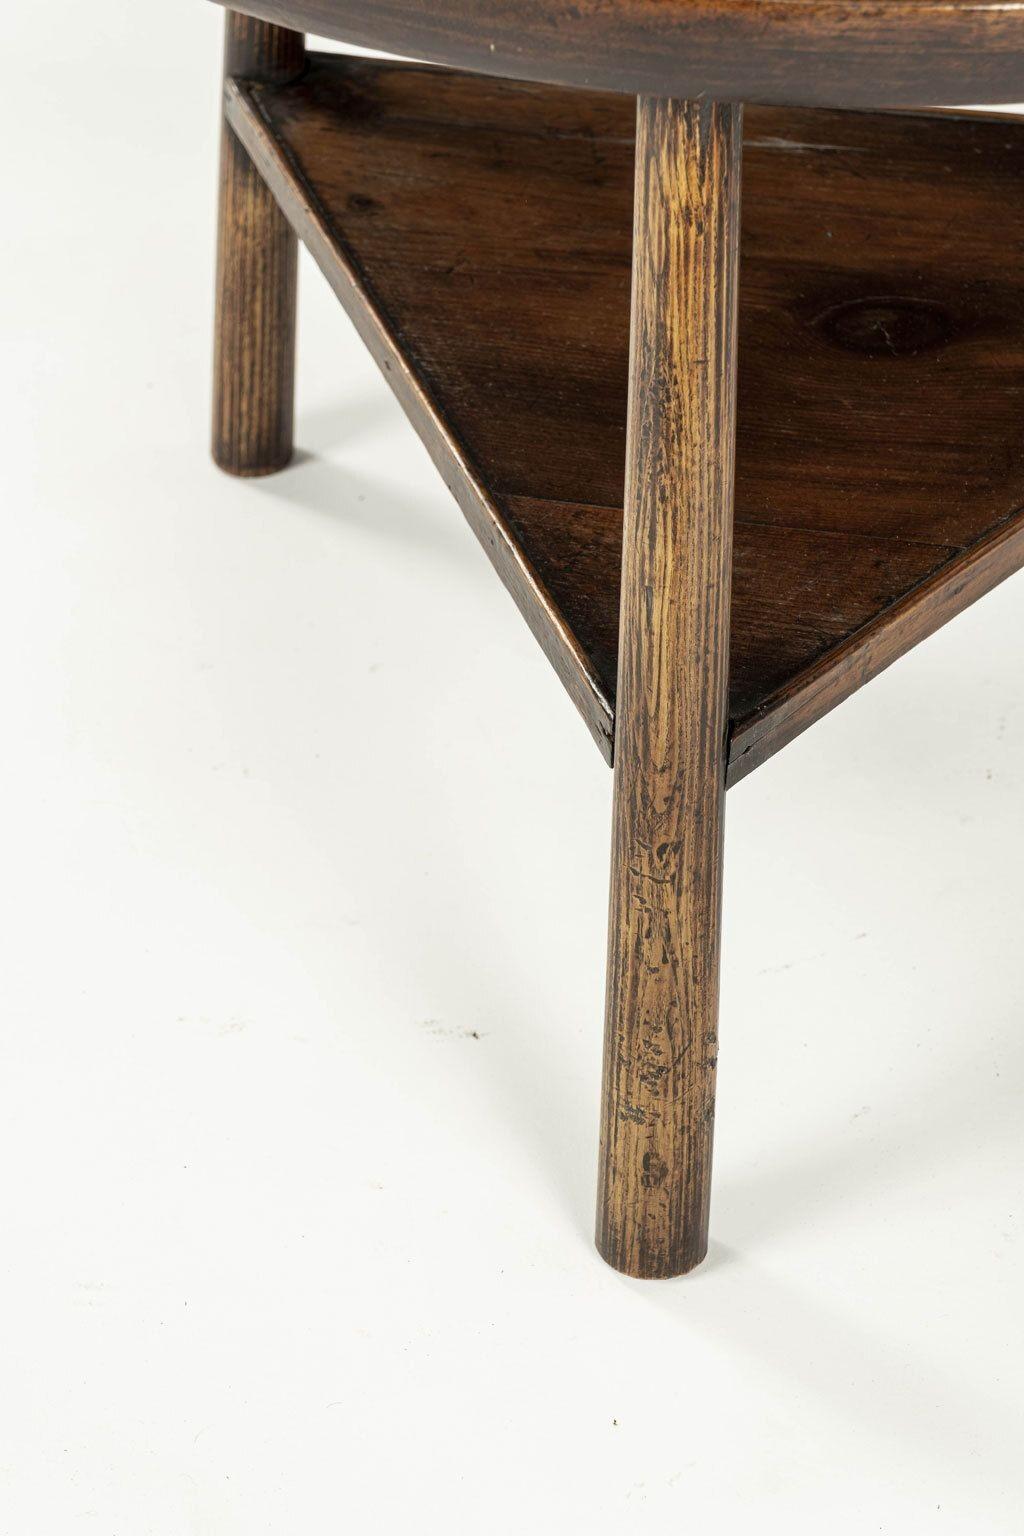 Low cricket table as side table or small coffee table. Georgian cricket table, circa 1740-1760, with thick single piece walnut table raised upon tapered round oak legs with pine under-shelf. Under-shelf surrounded by gallery edge. Height cut down at